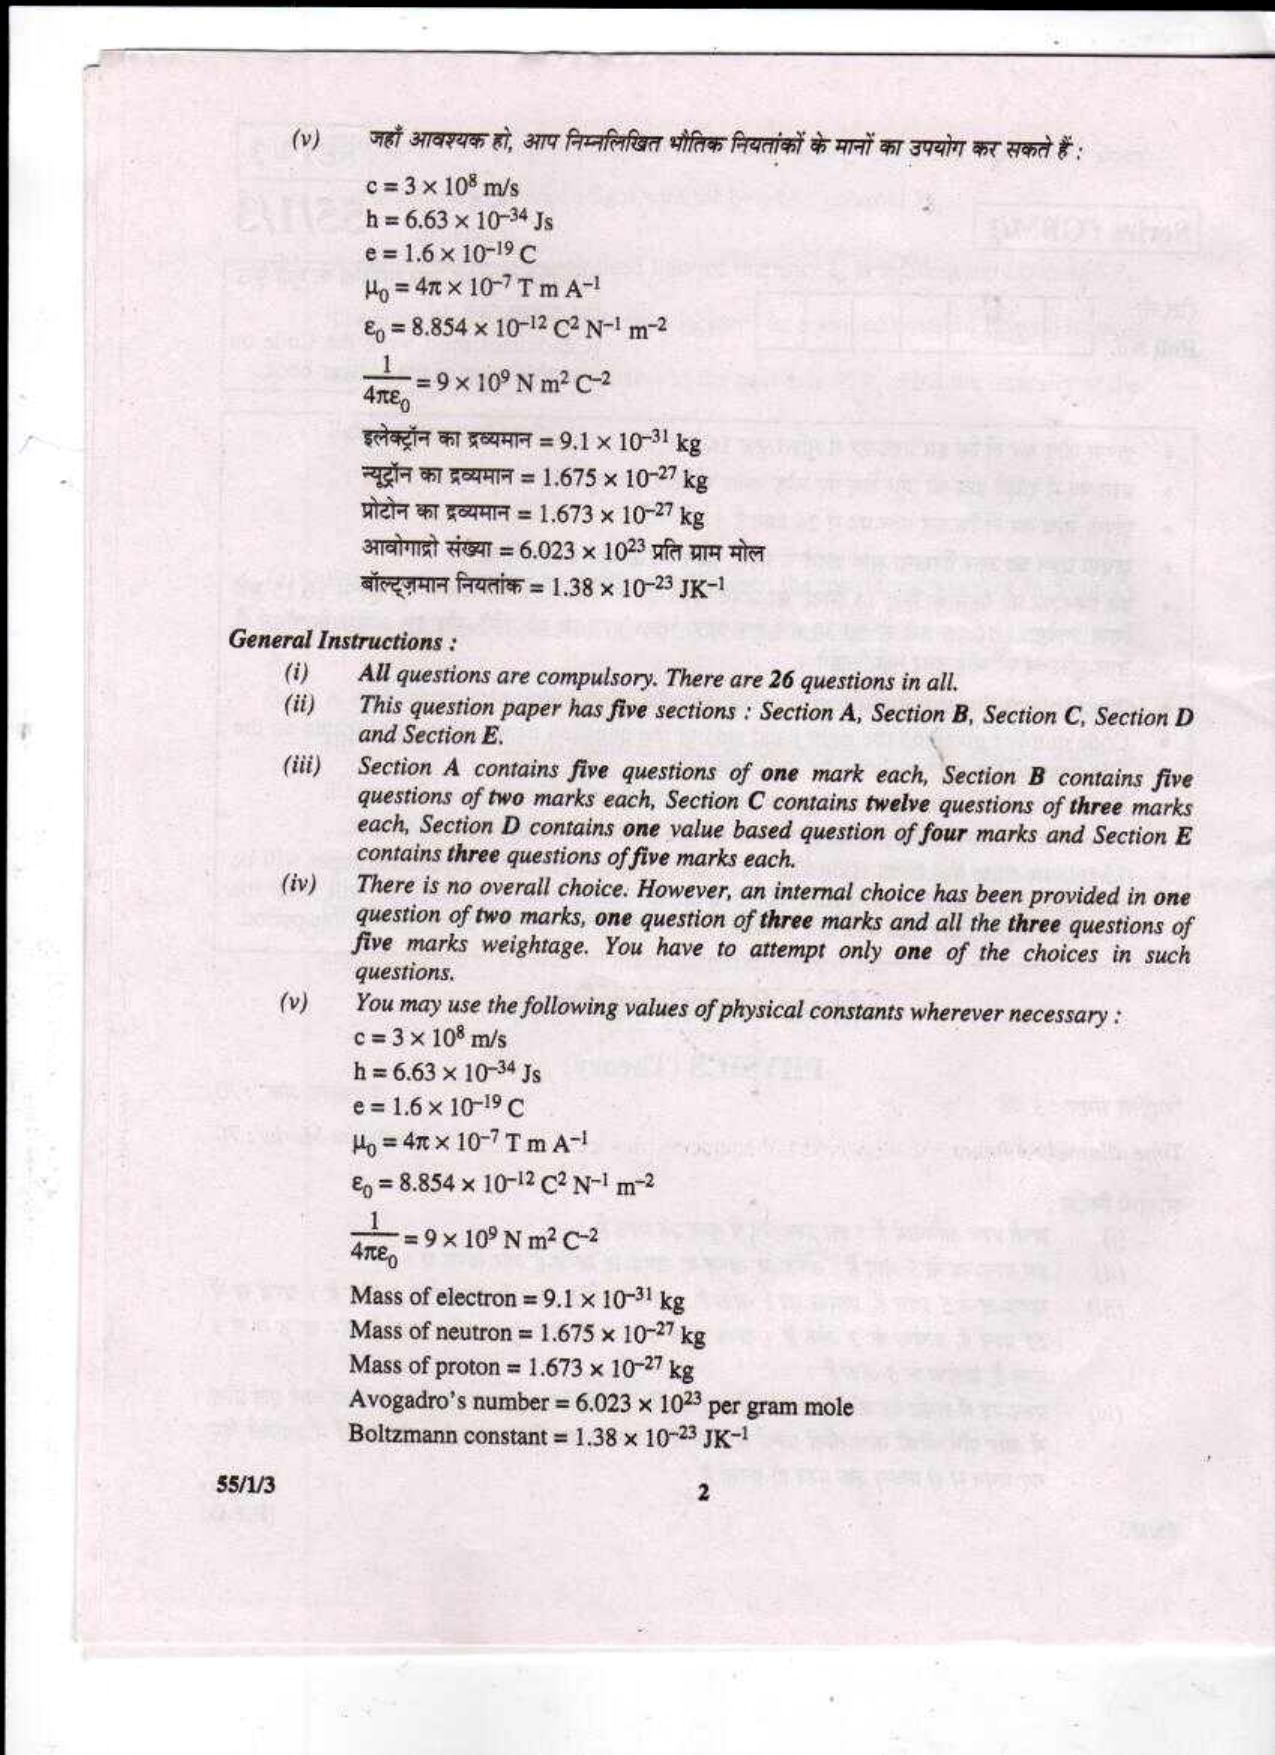 CBSE Class 12 Physics (Theory) SET 3-Delhi-12 2017 Question Paper - Page 2